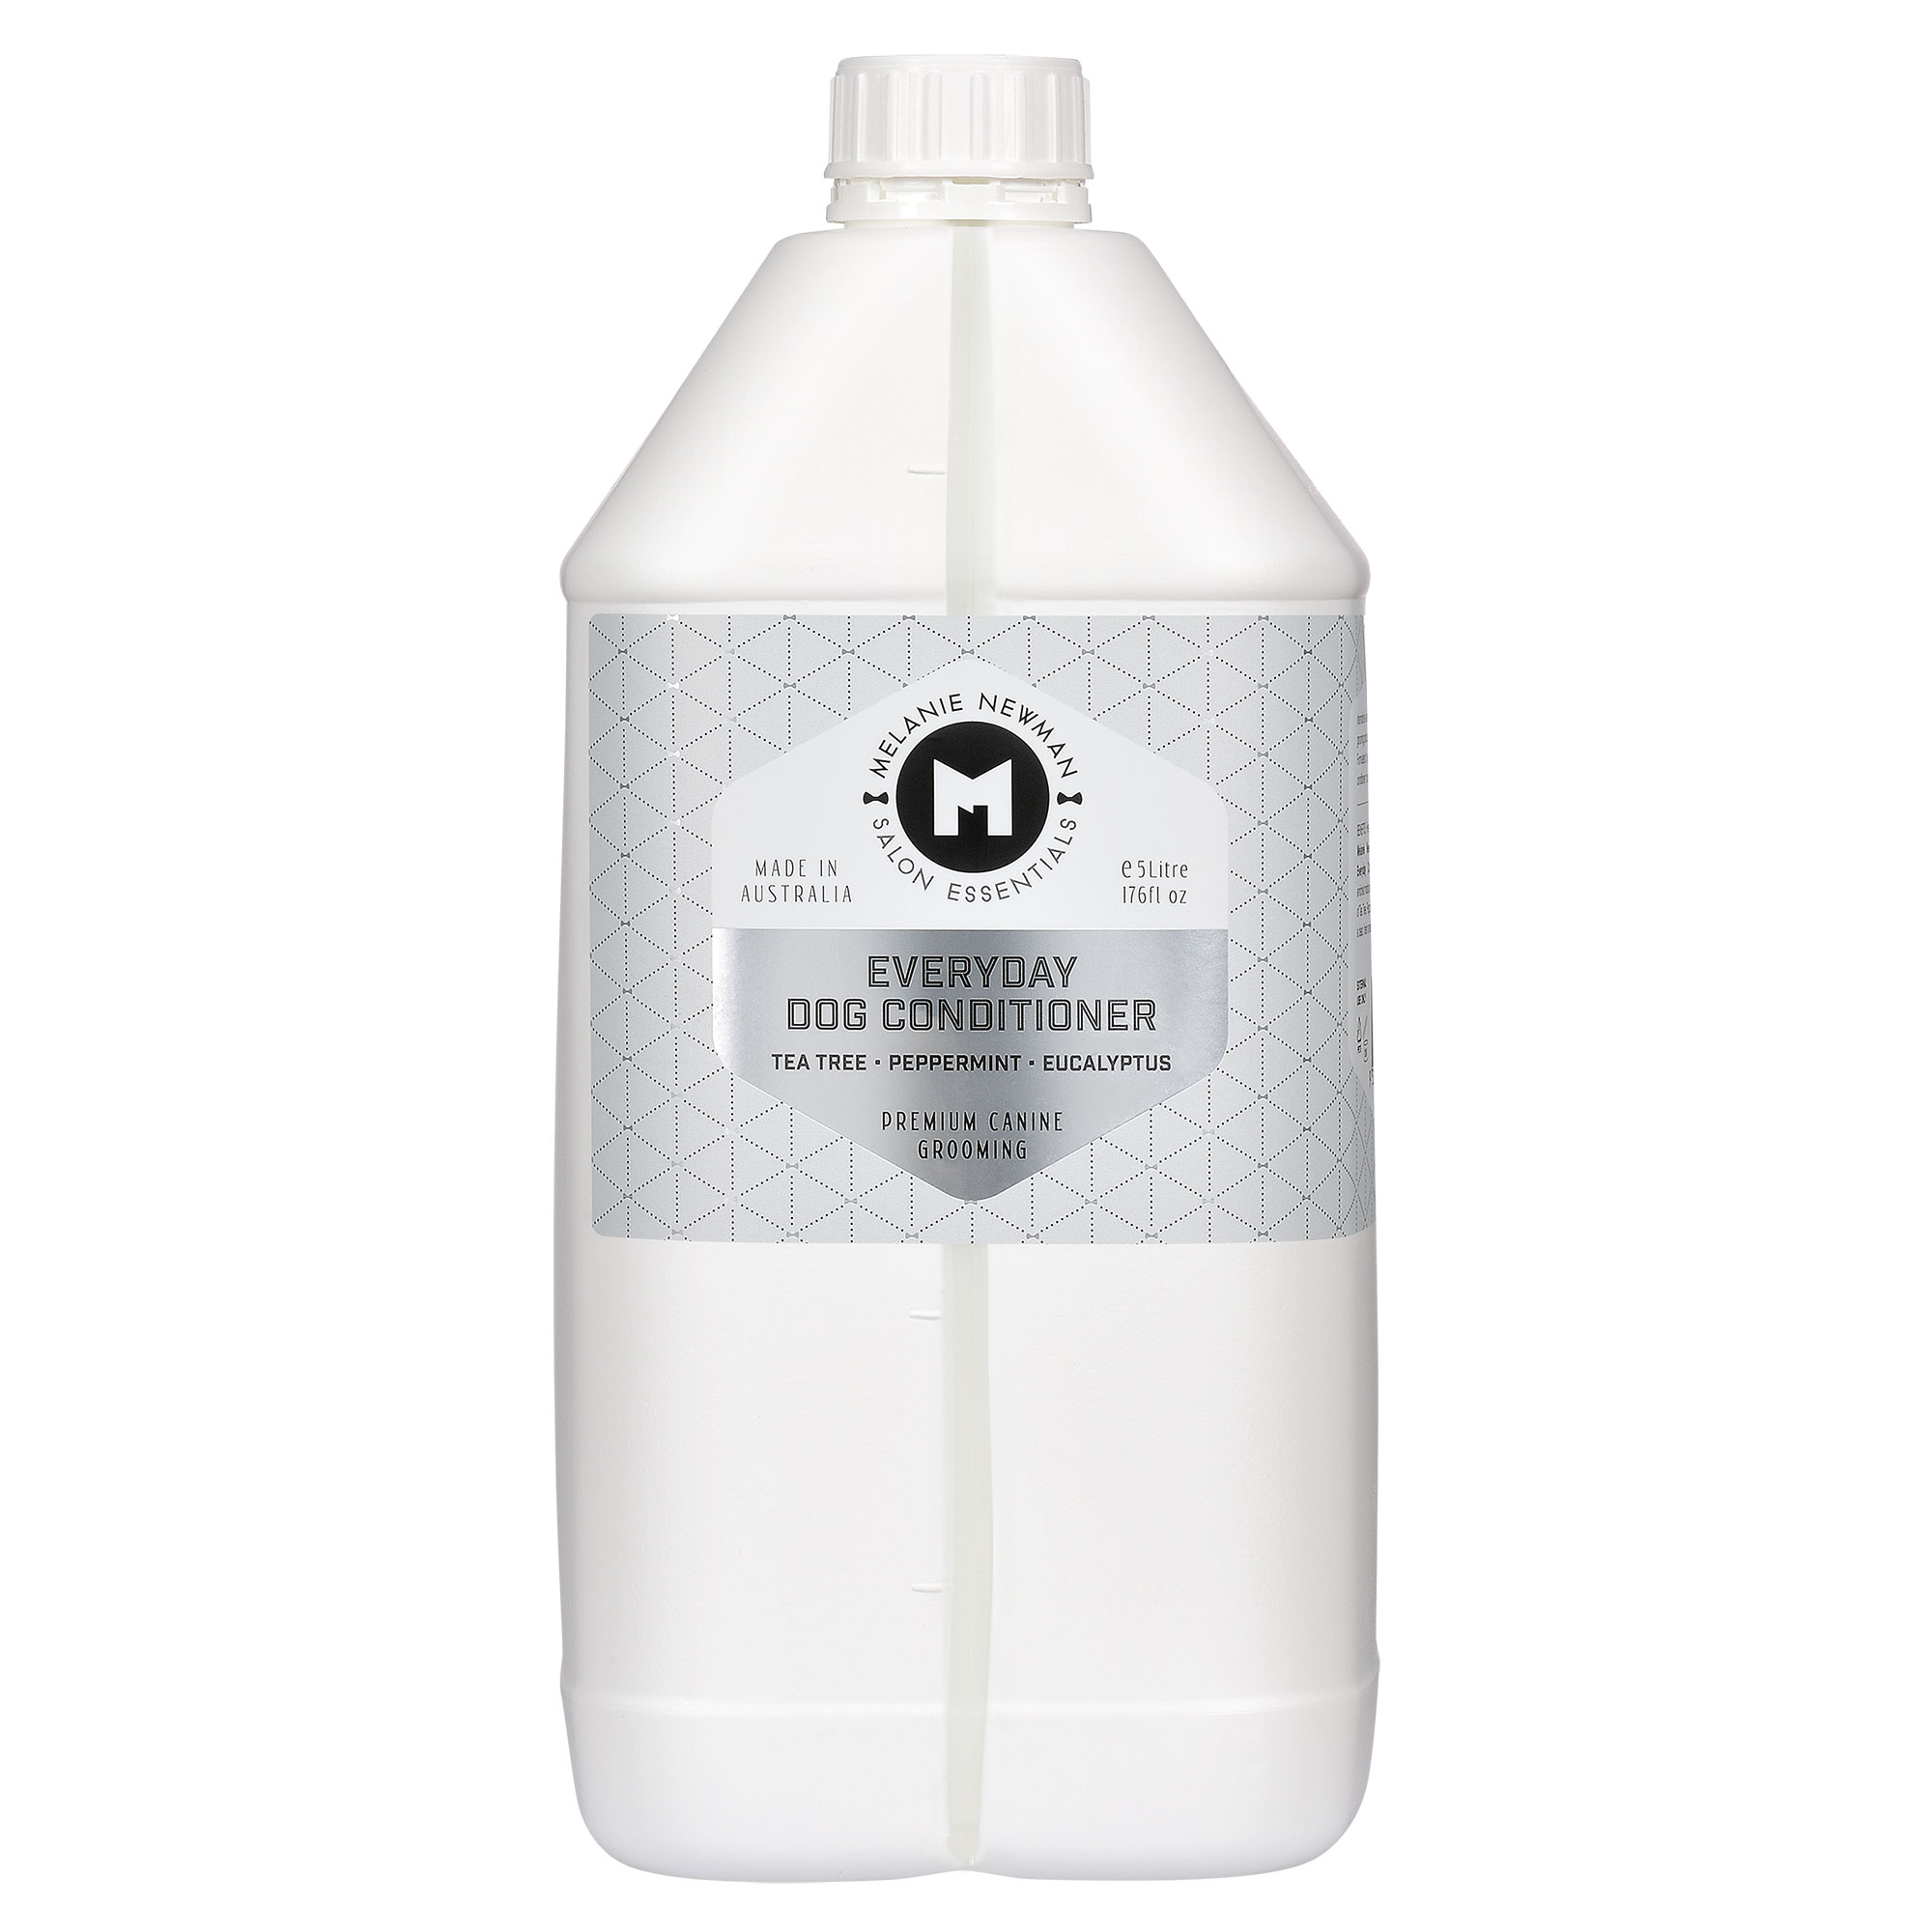 melanie newman everyday conditioner 5litre for dog grooming